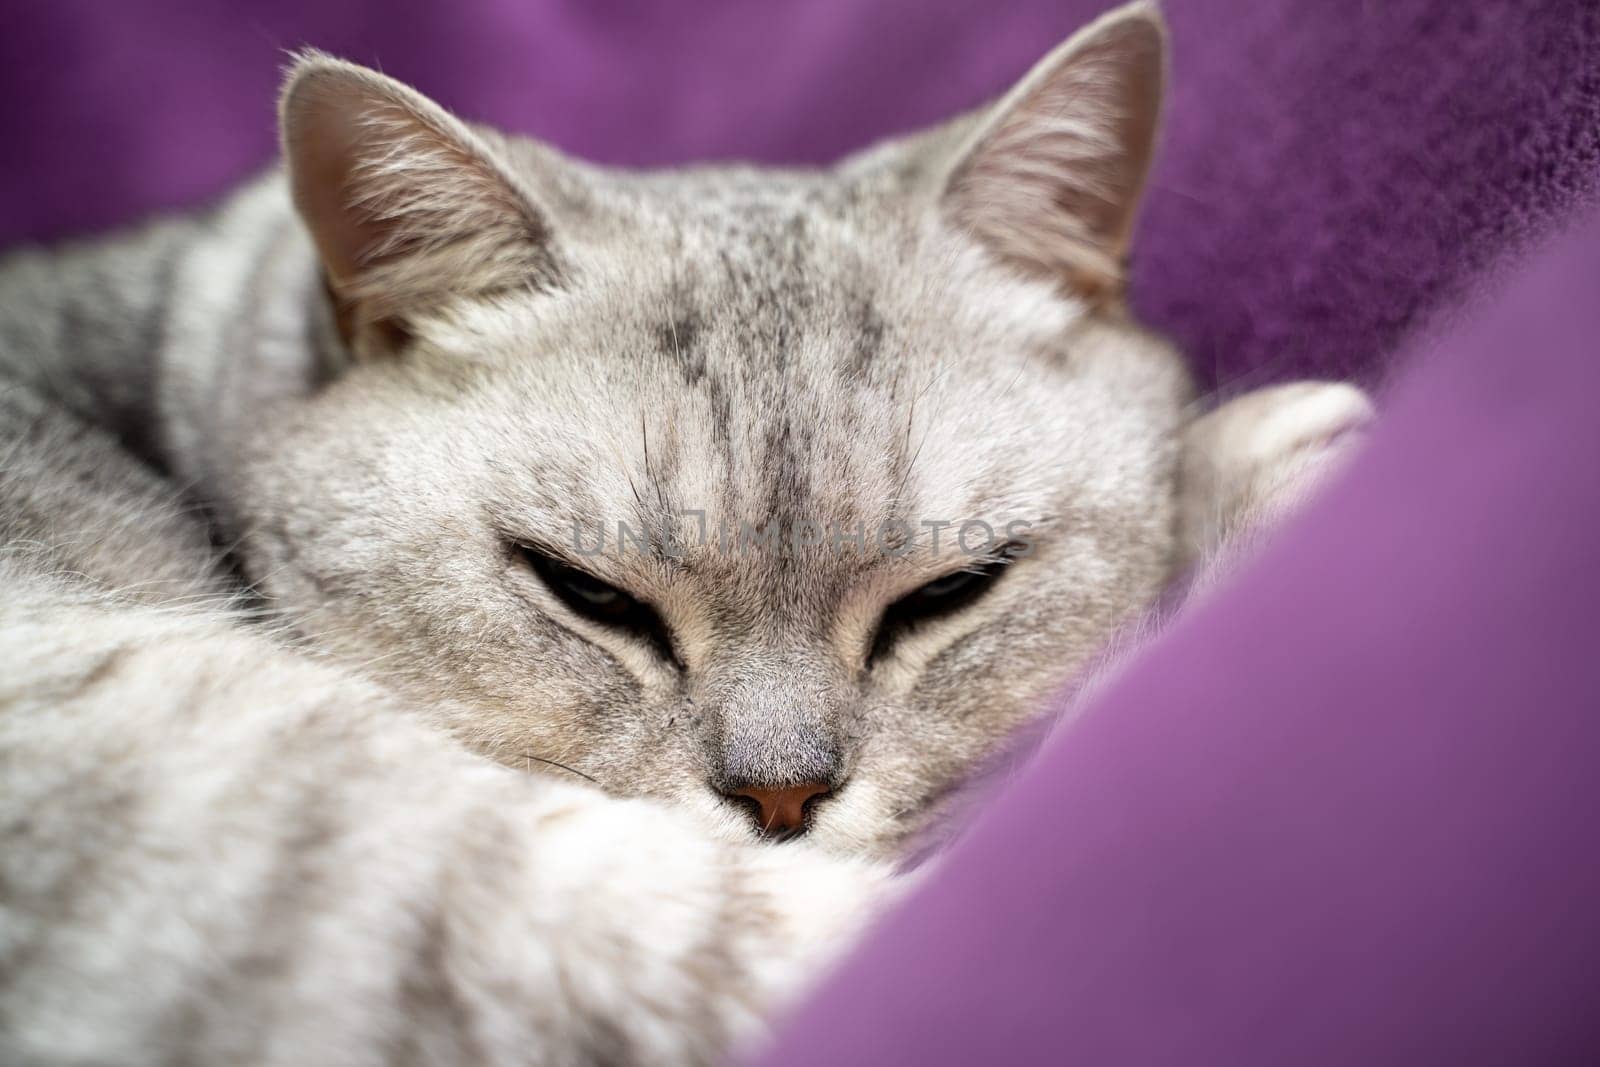 scottish straight cat is sleeping. Close-up of a sleeping cat muzzle, eyes closed. Against the background of a purple blanket. Favorite Pets, cat food